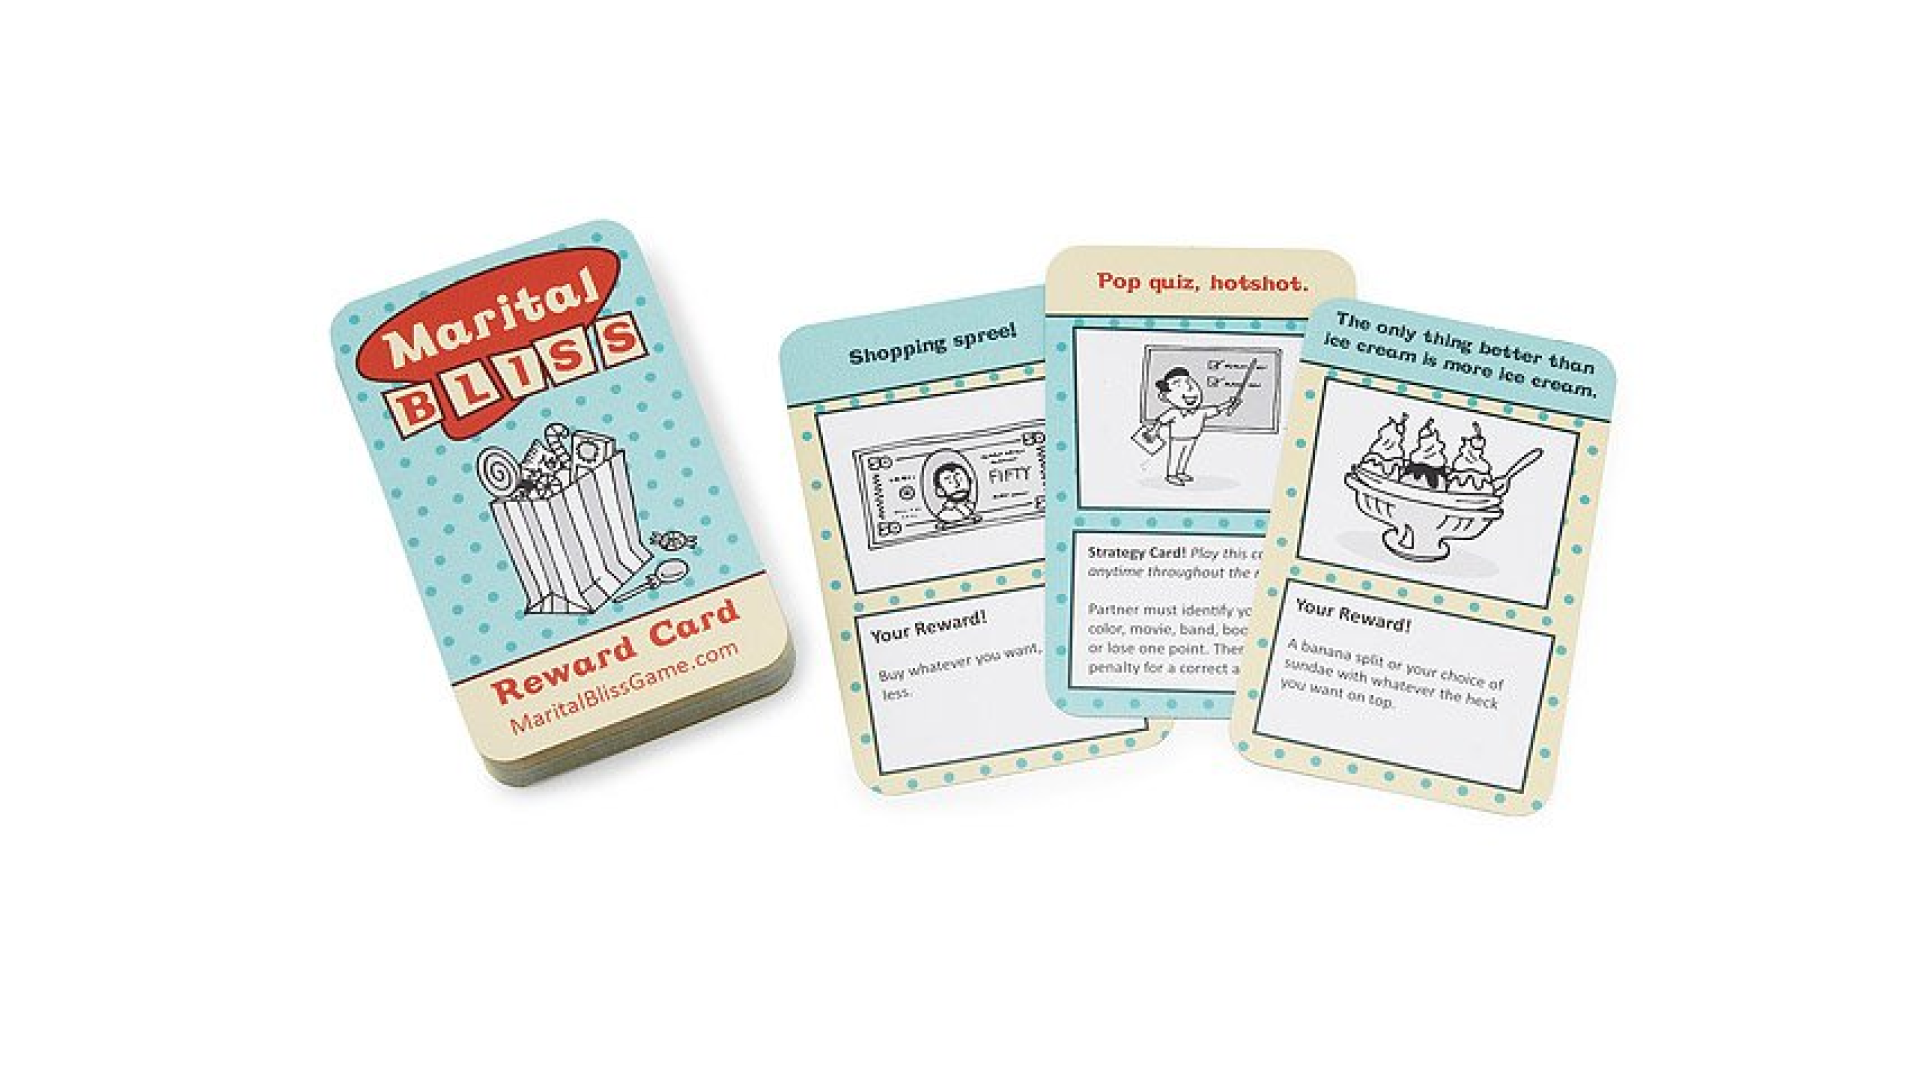 Martial bliss card game